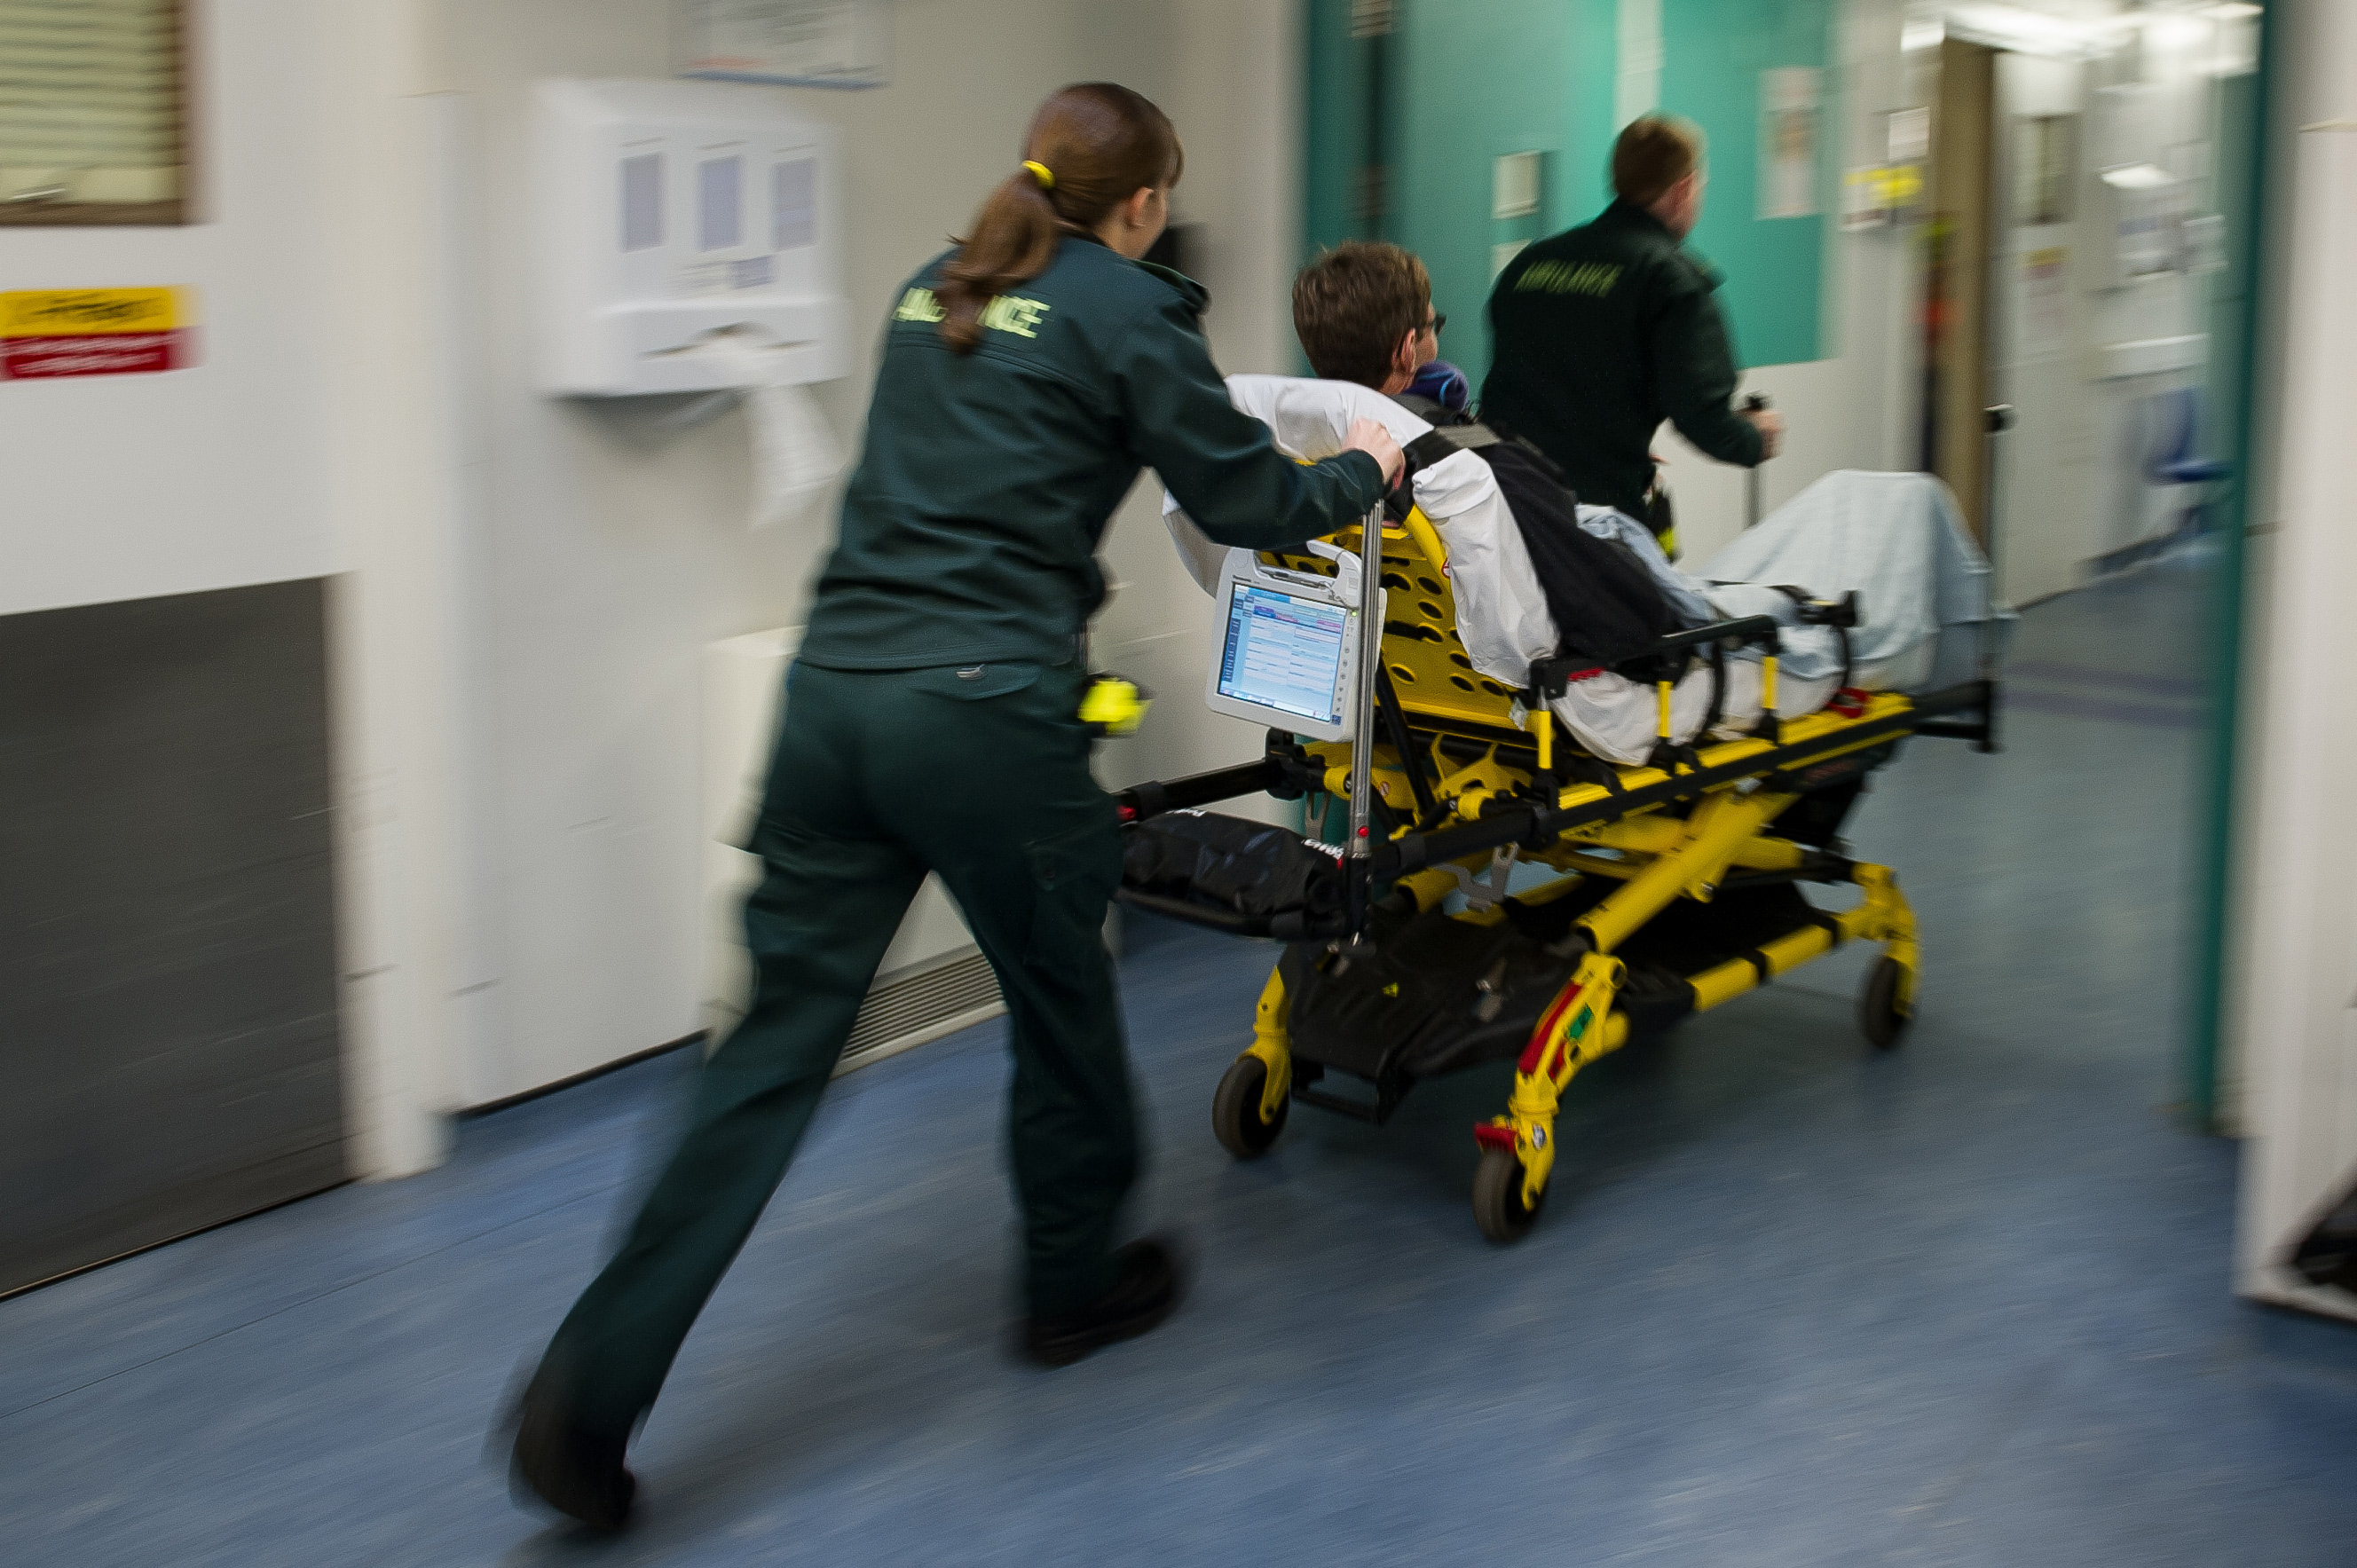 Paramedics in hospital with patient